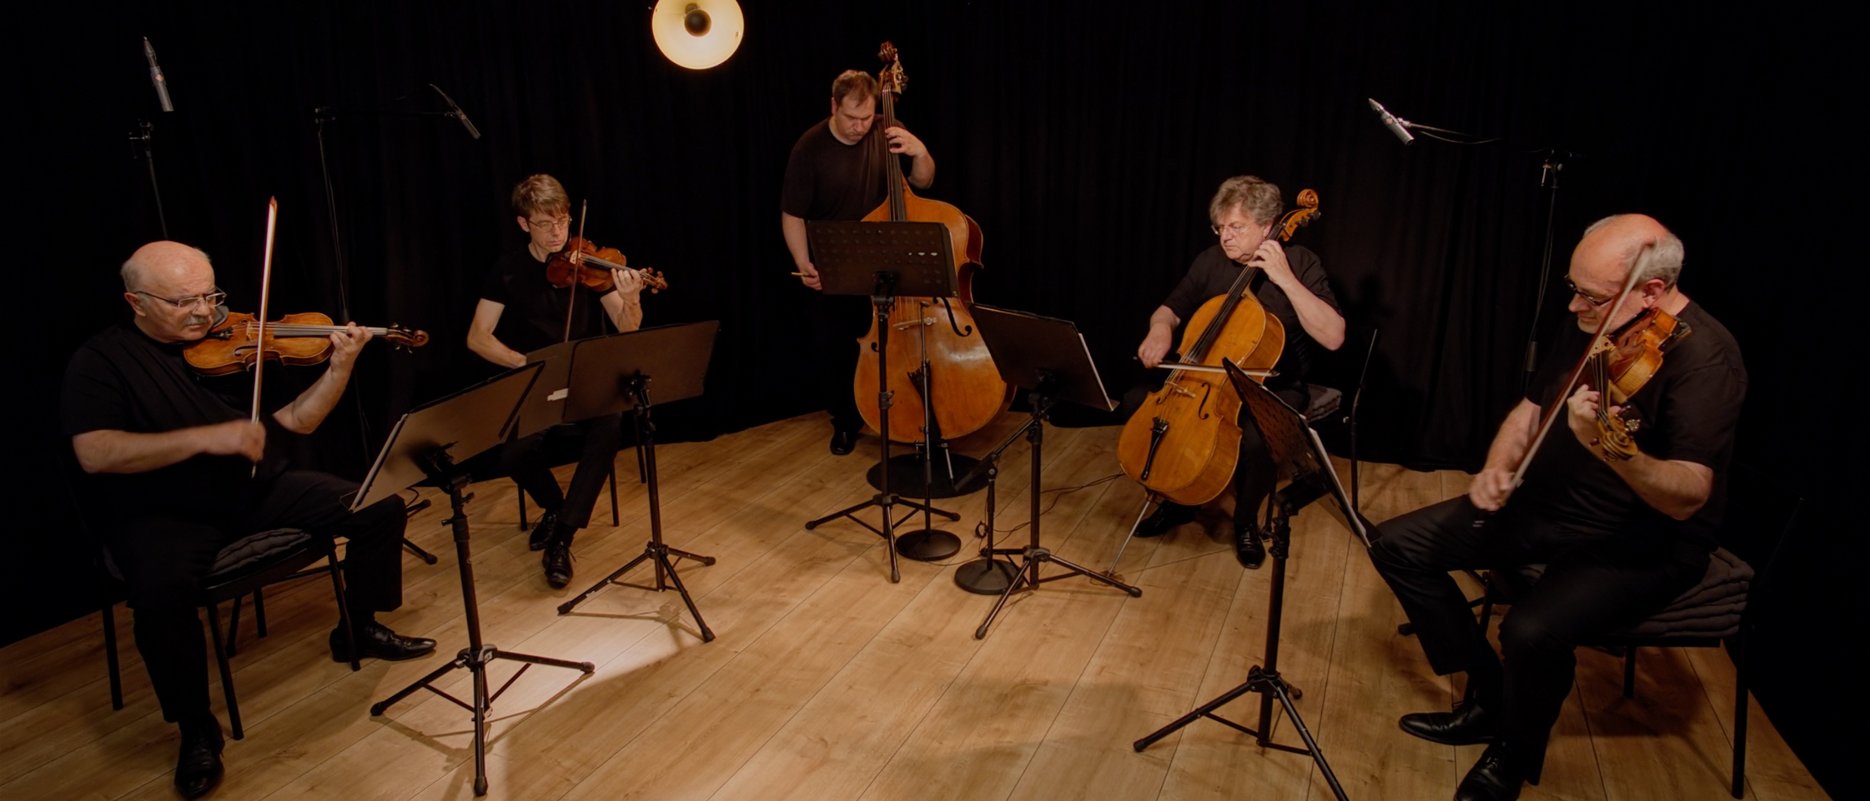 Five musicians in a semicircle in front of a black background